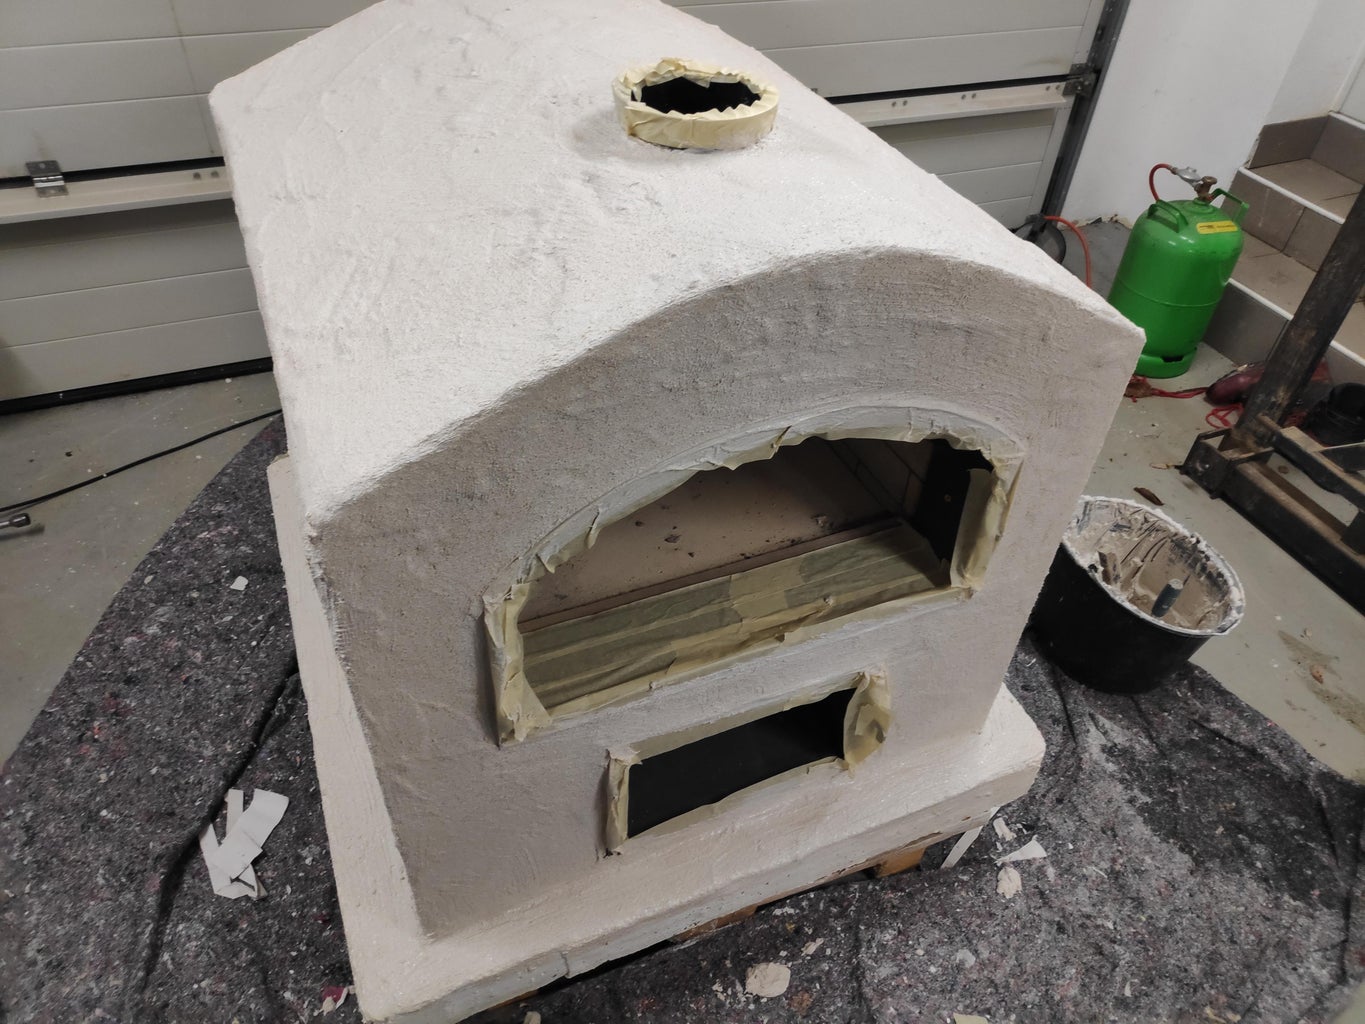 Plaster/paint the Oven